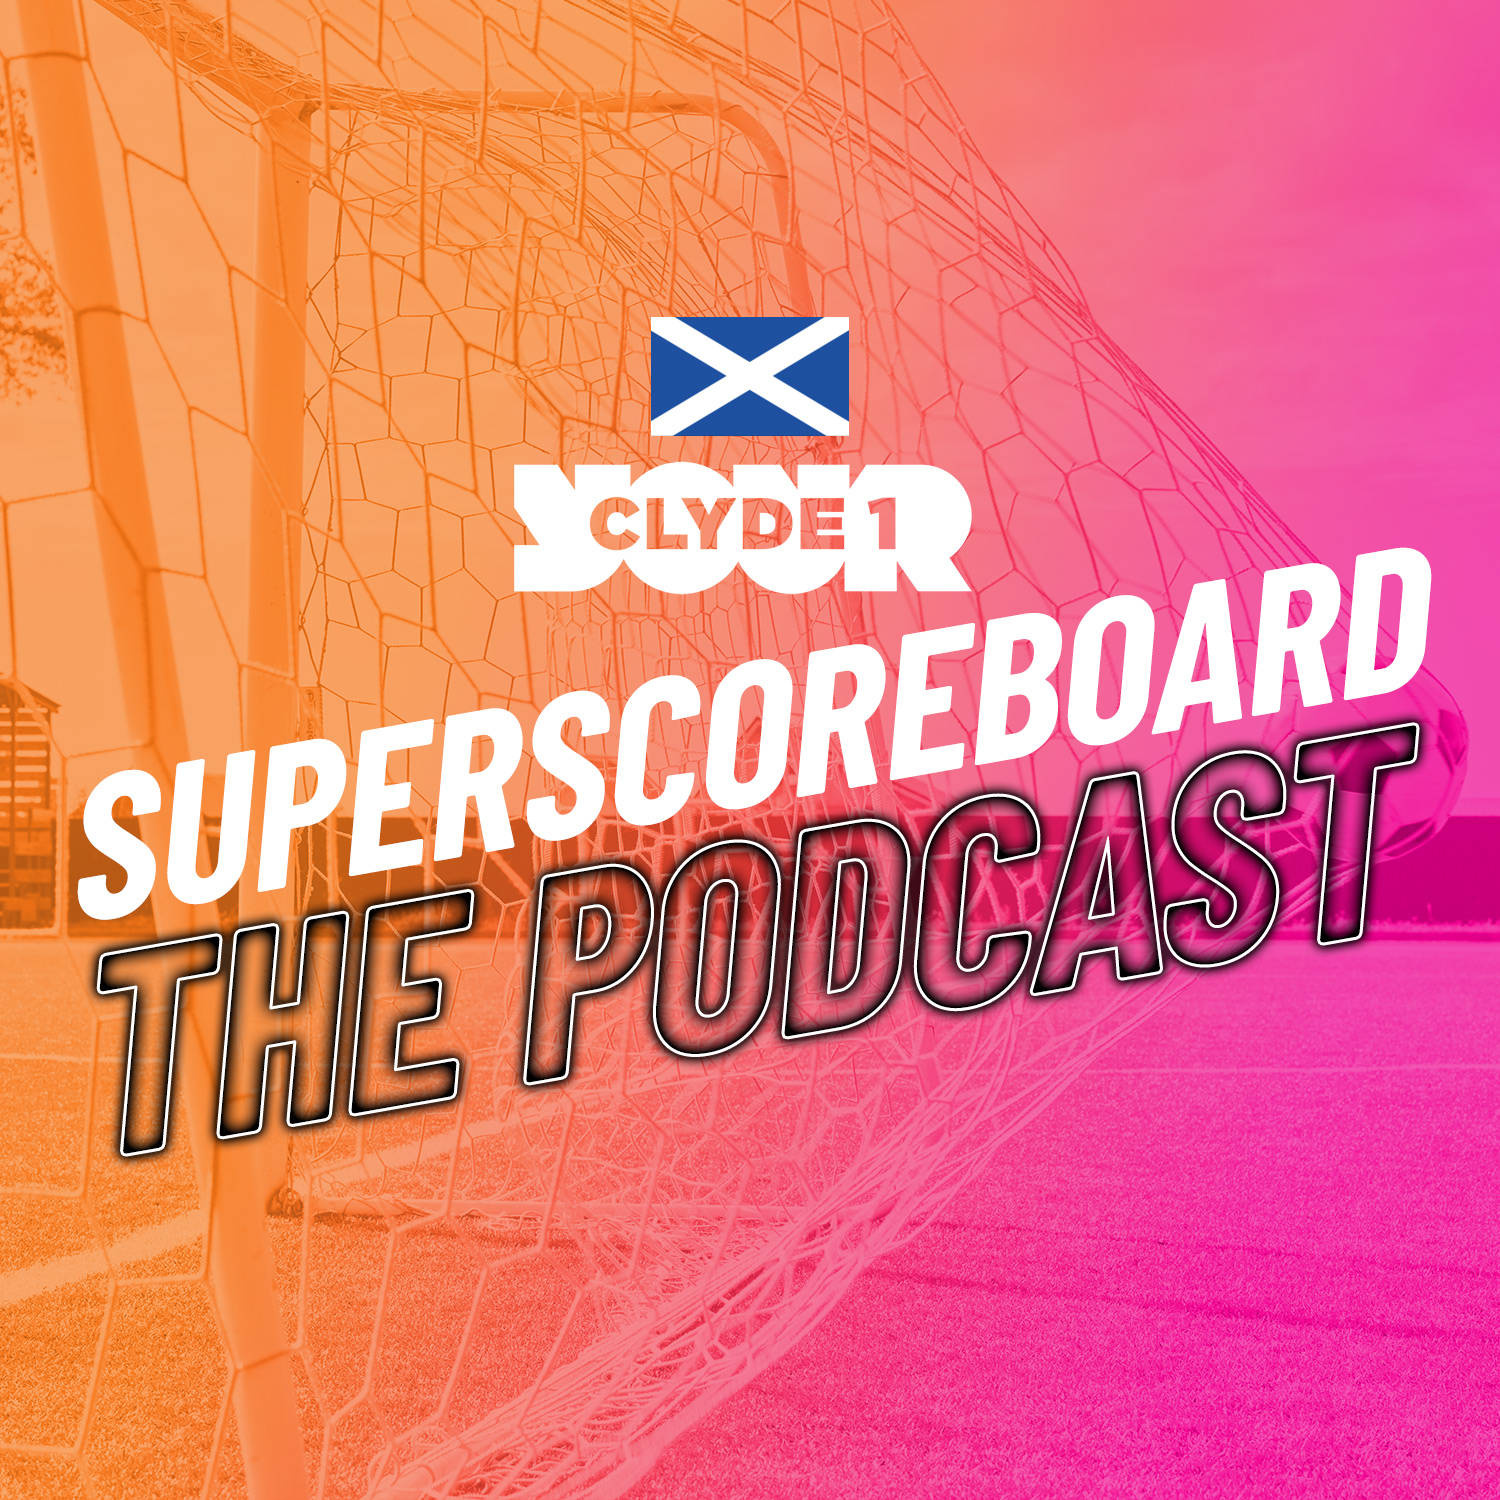 Monday 27th May Clyde 1 Superscoreboard